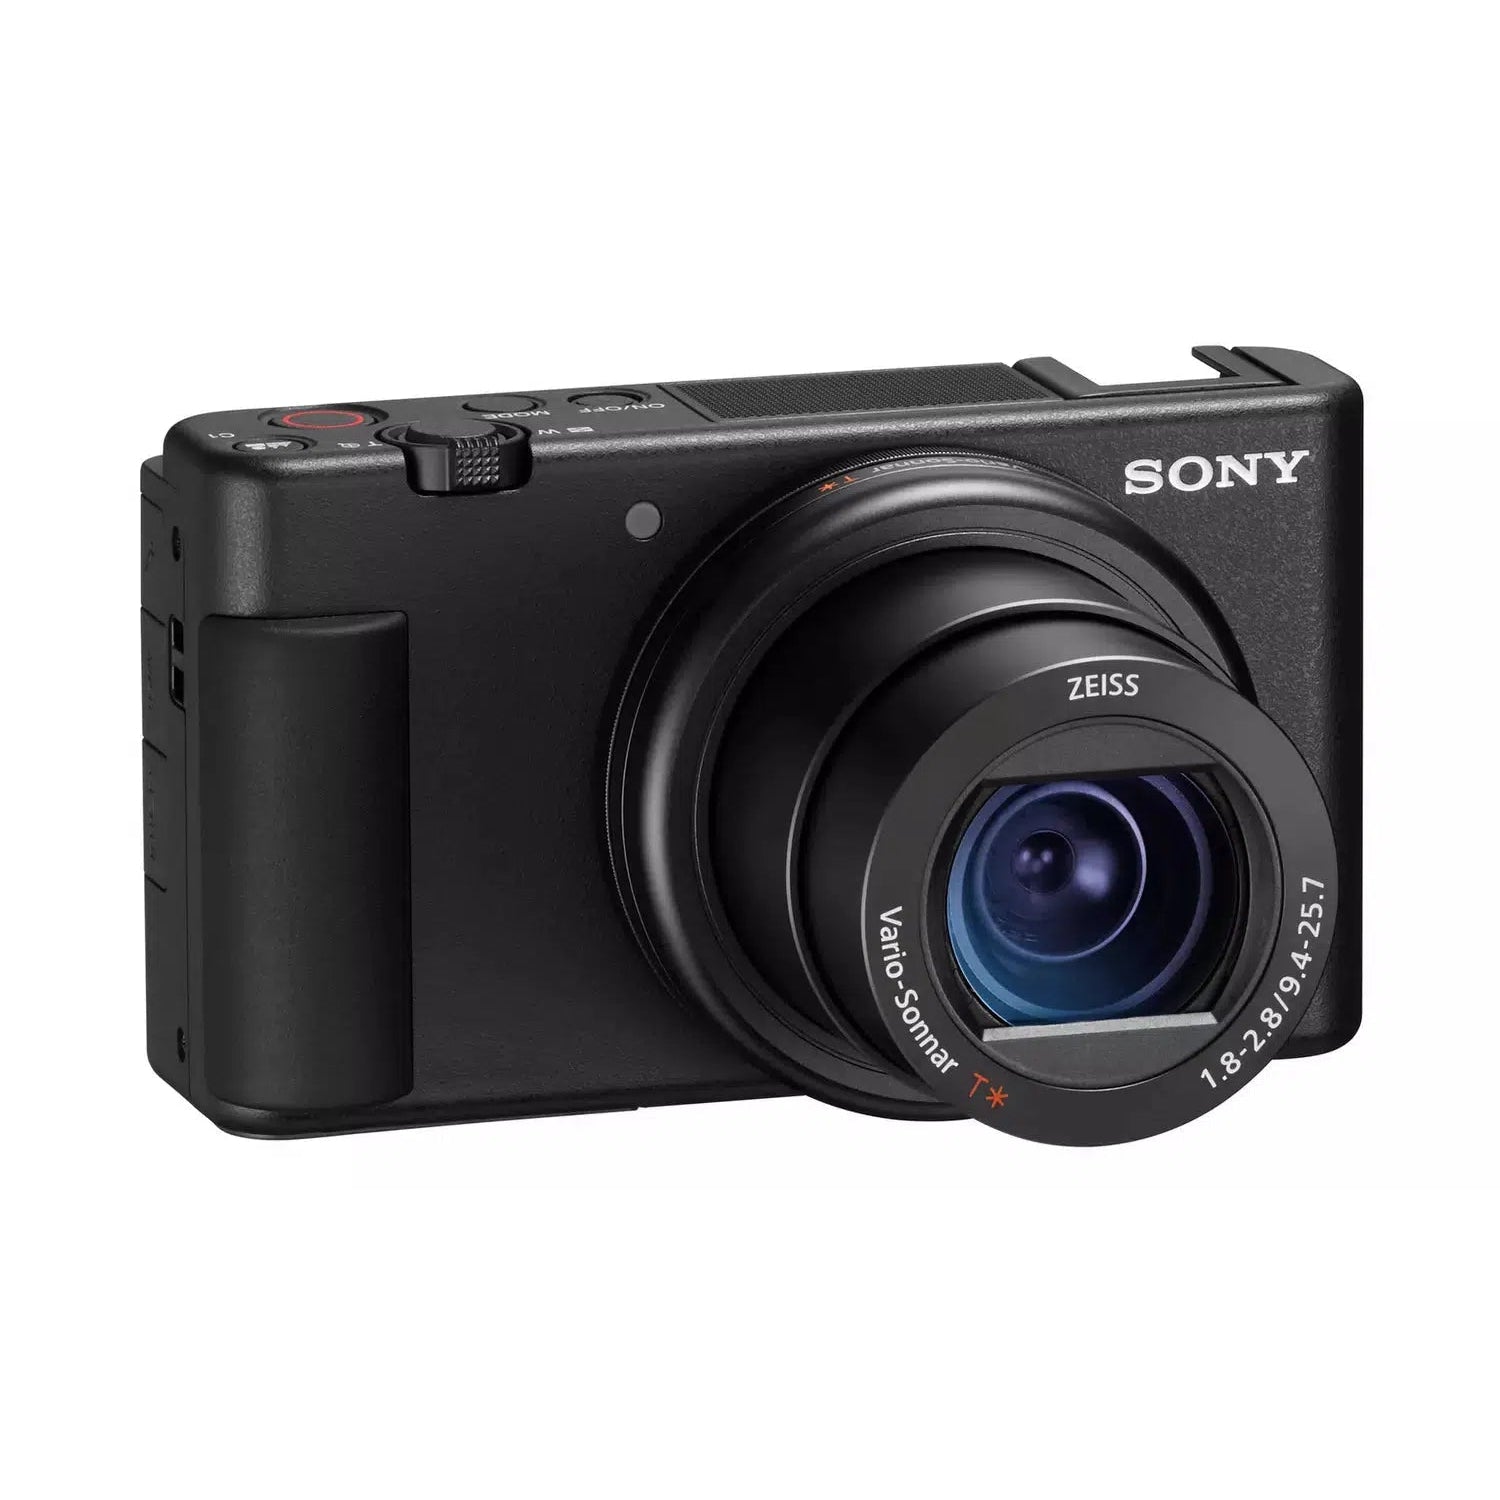 Sony ZV-1 Compact Vlogging Camera with 24-70mm Lens - Black - Excellent - No Charger